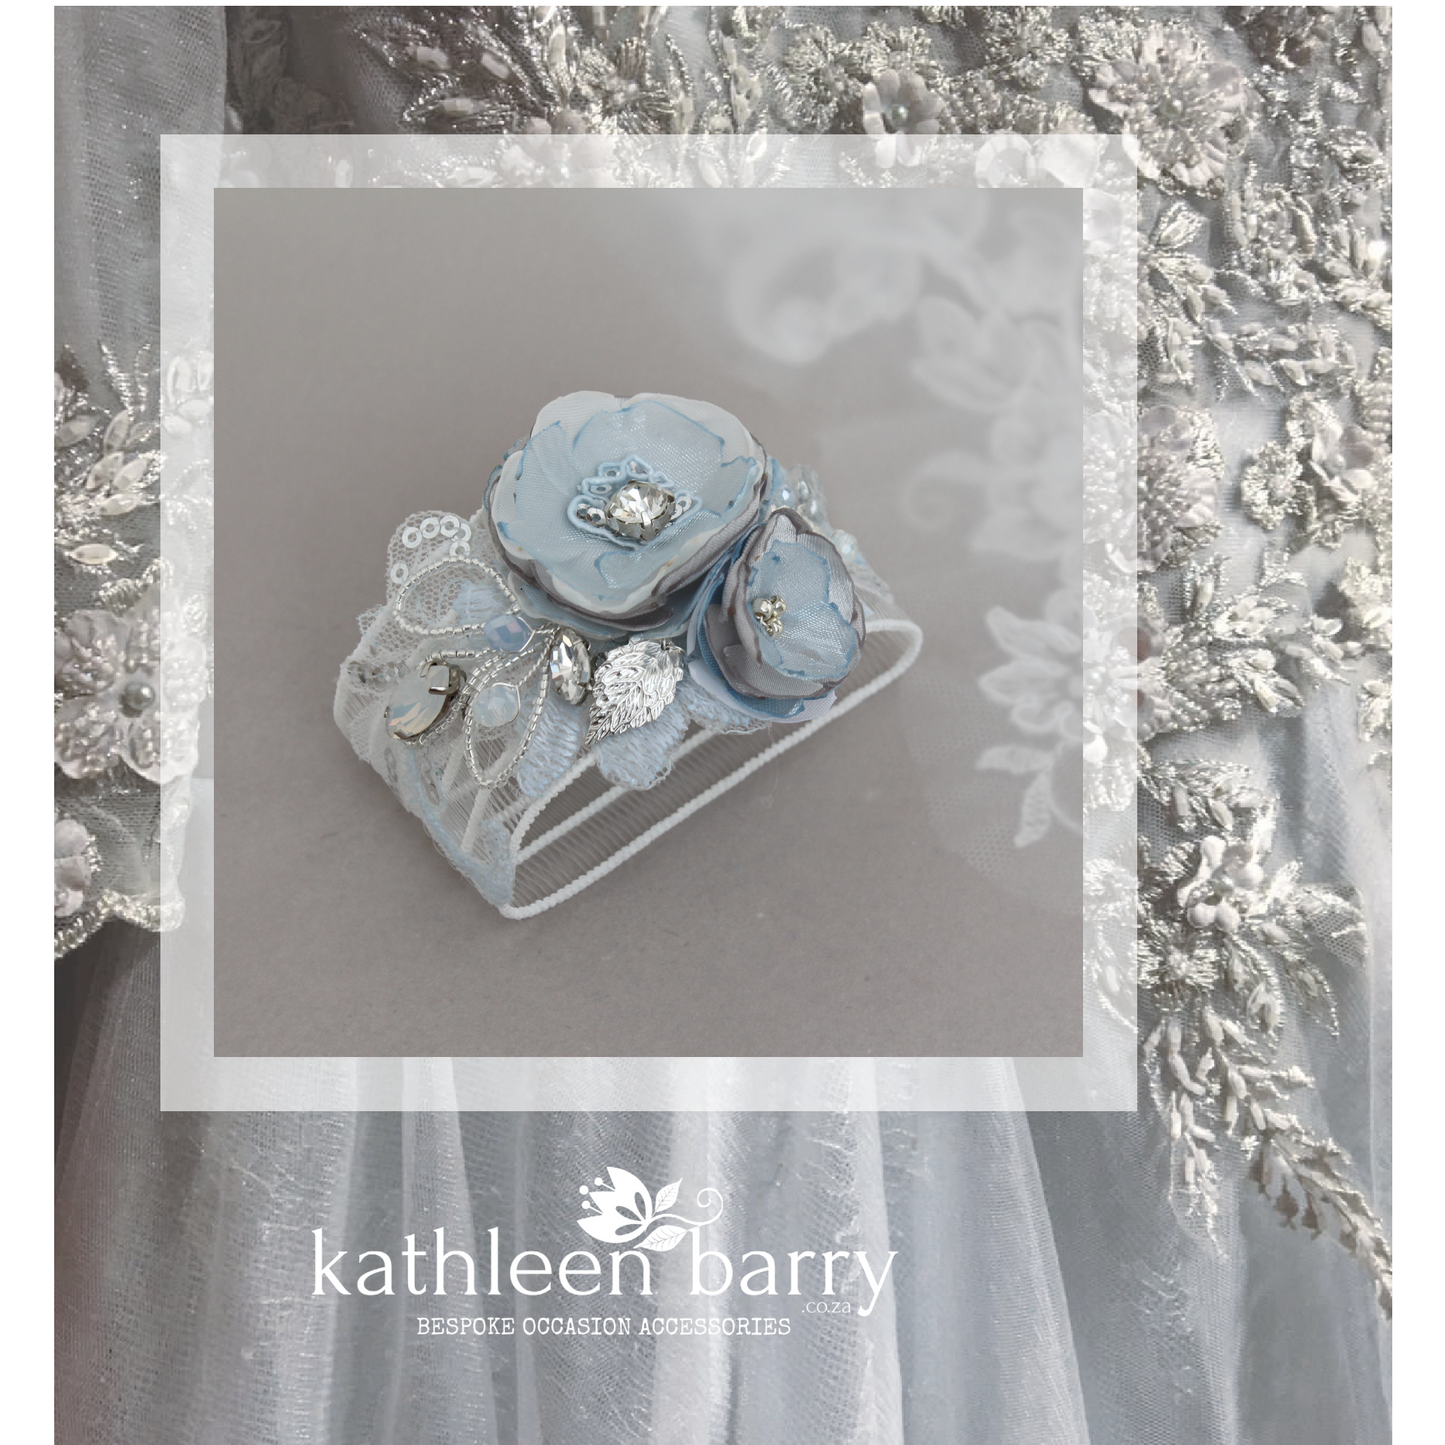 Shauna wrist corsage cuff bracelet - Silver grey and pale blue (colors on request) prom matric dance